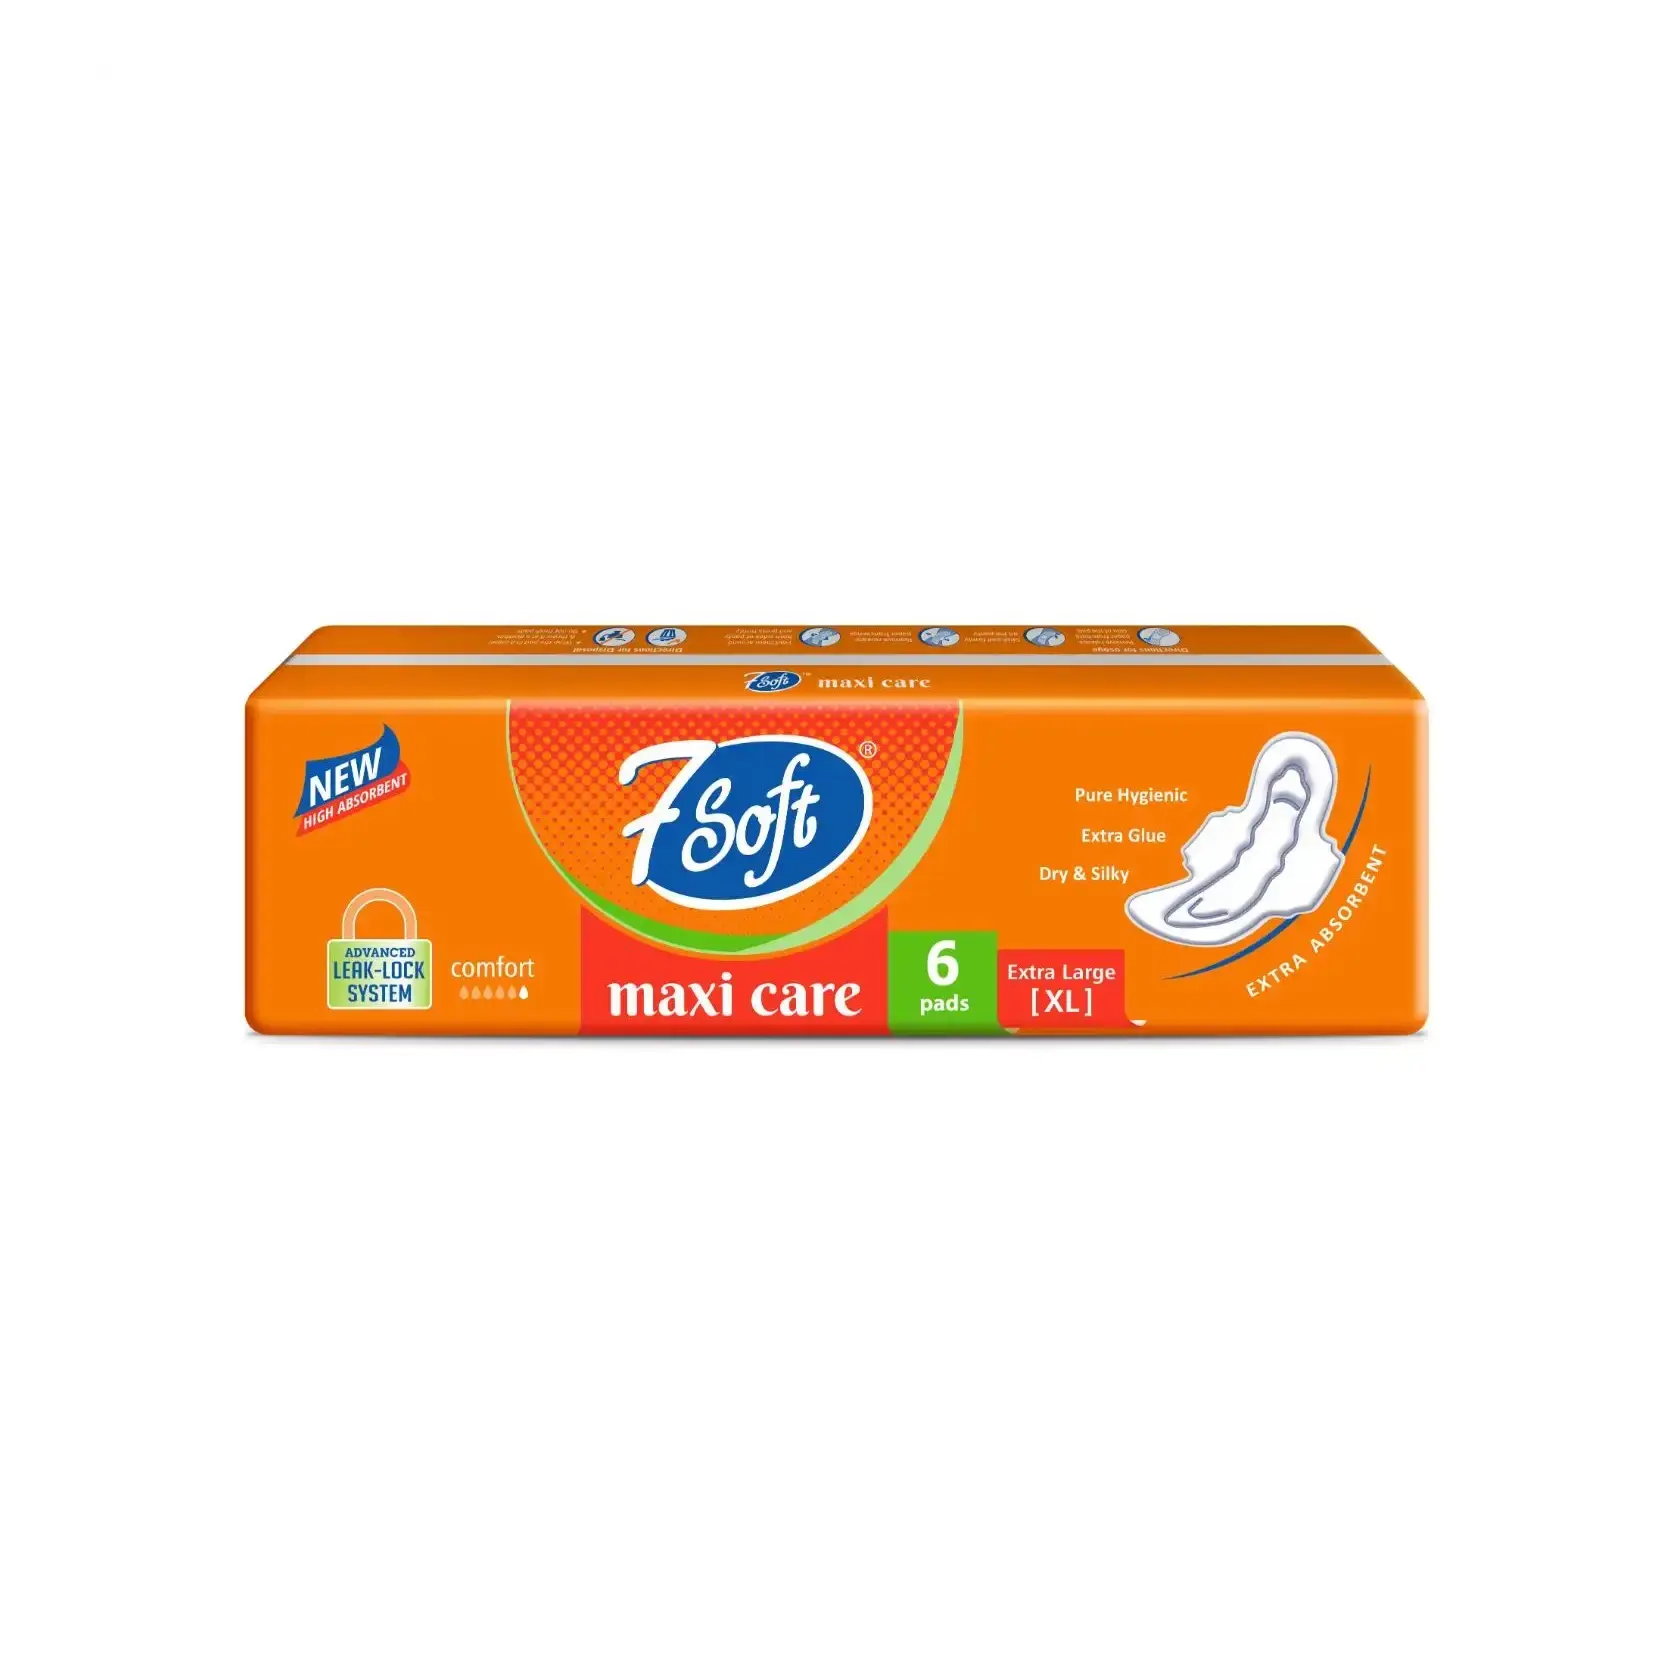 Most Selling 7 Soft Maxi Care XL Sanitary Napkin for Women's Top Ranking Feminine Products Available at Wholesale Price